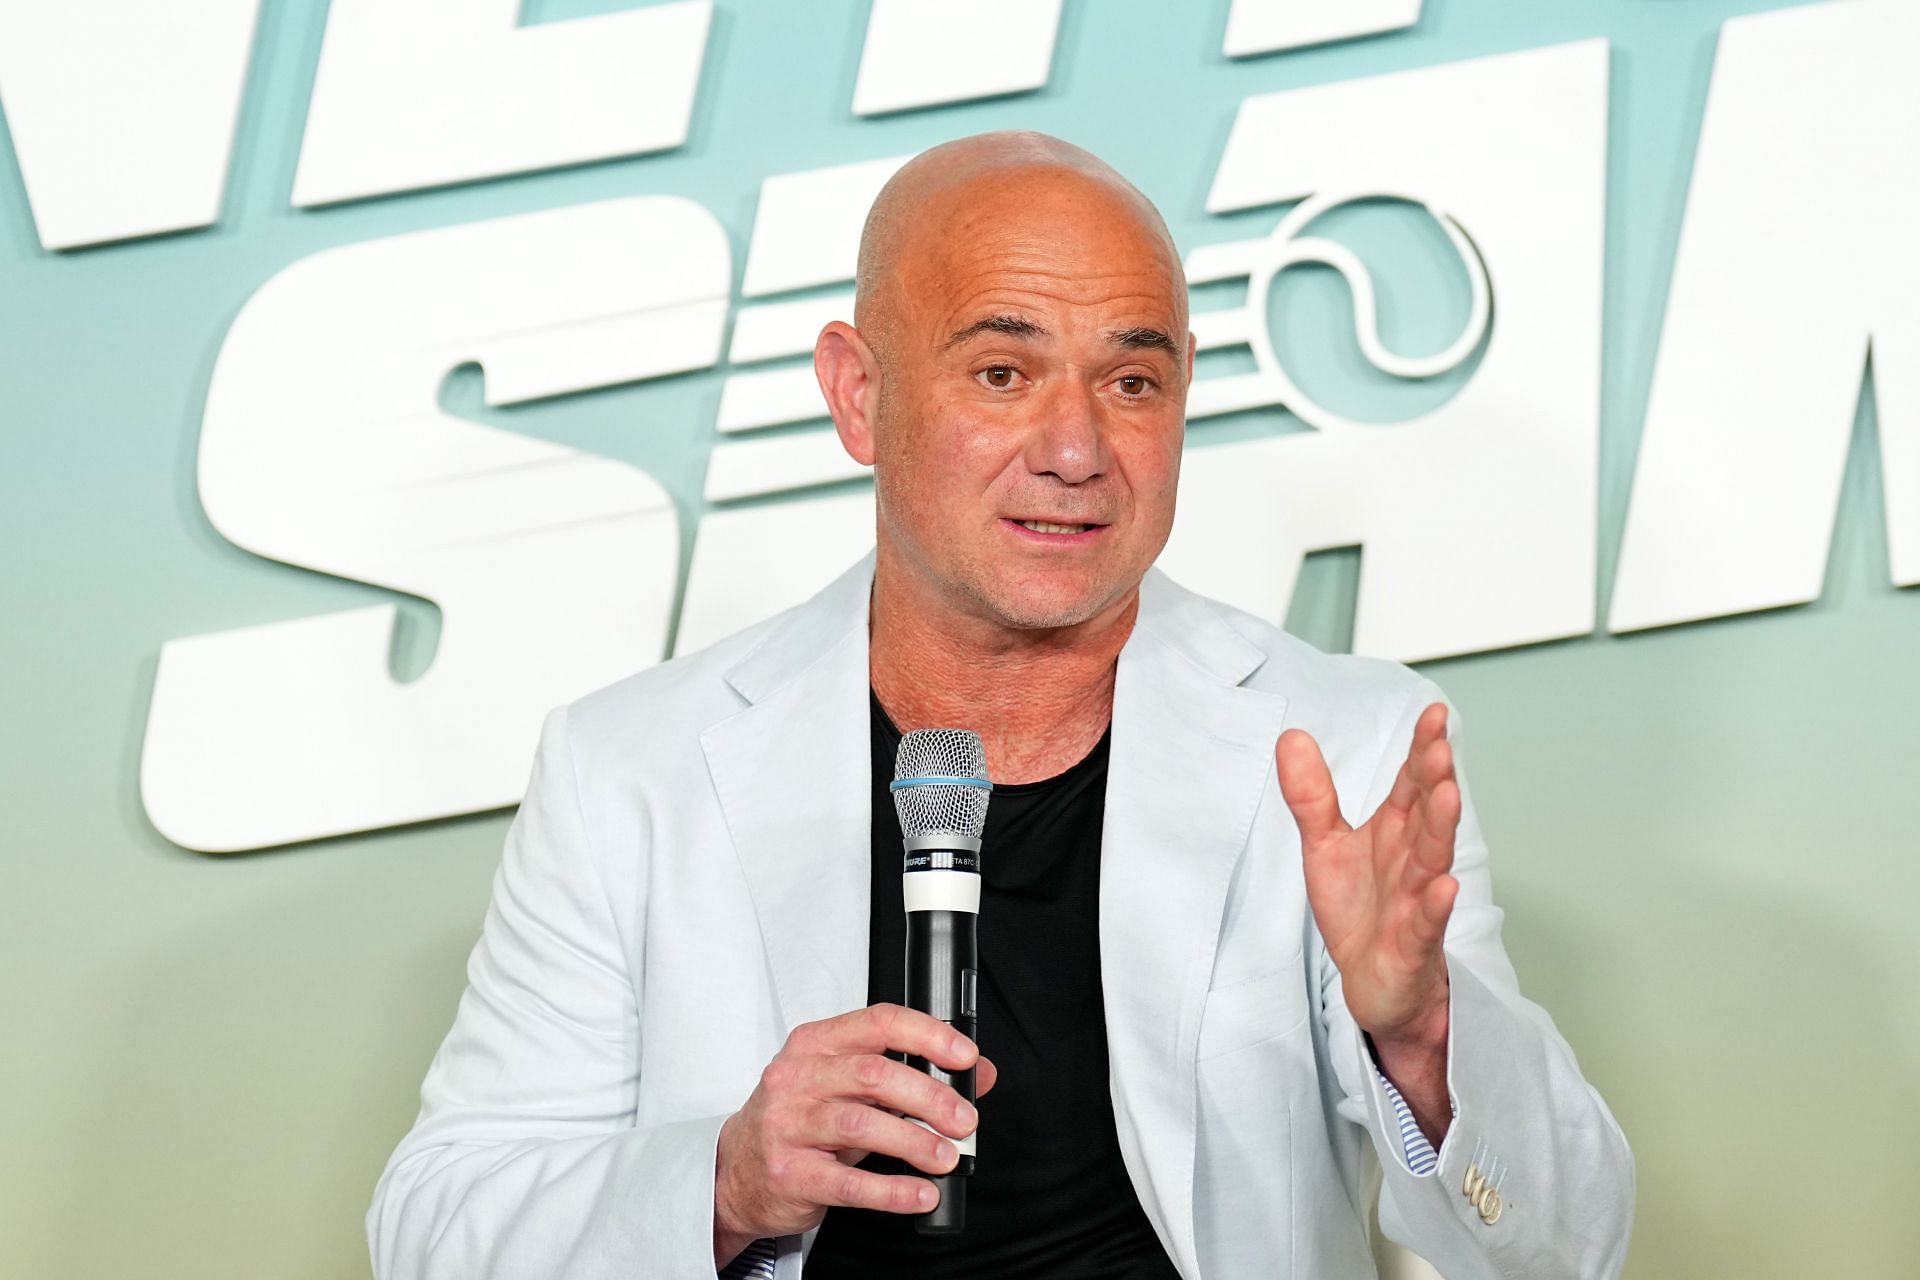 Andre Agassi at The Netflix Slam media availability event in Las Vegas, Nevada - Getty Images